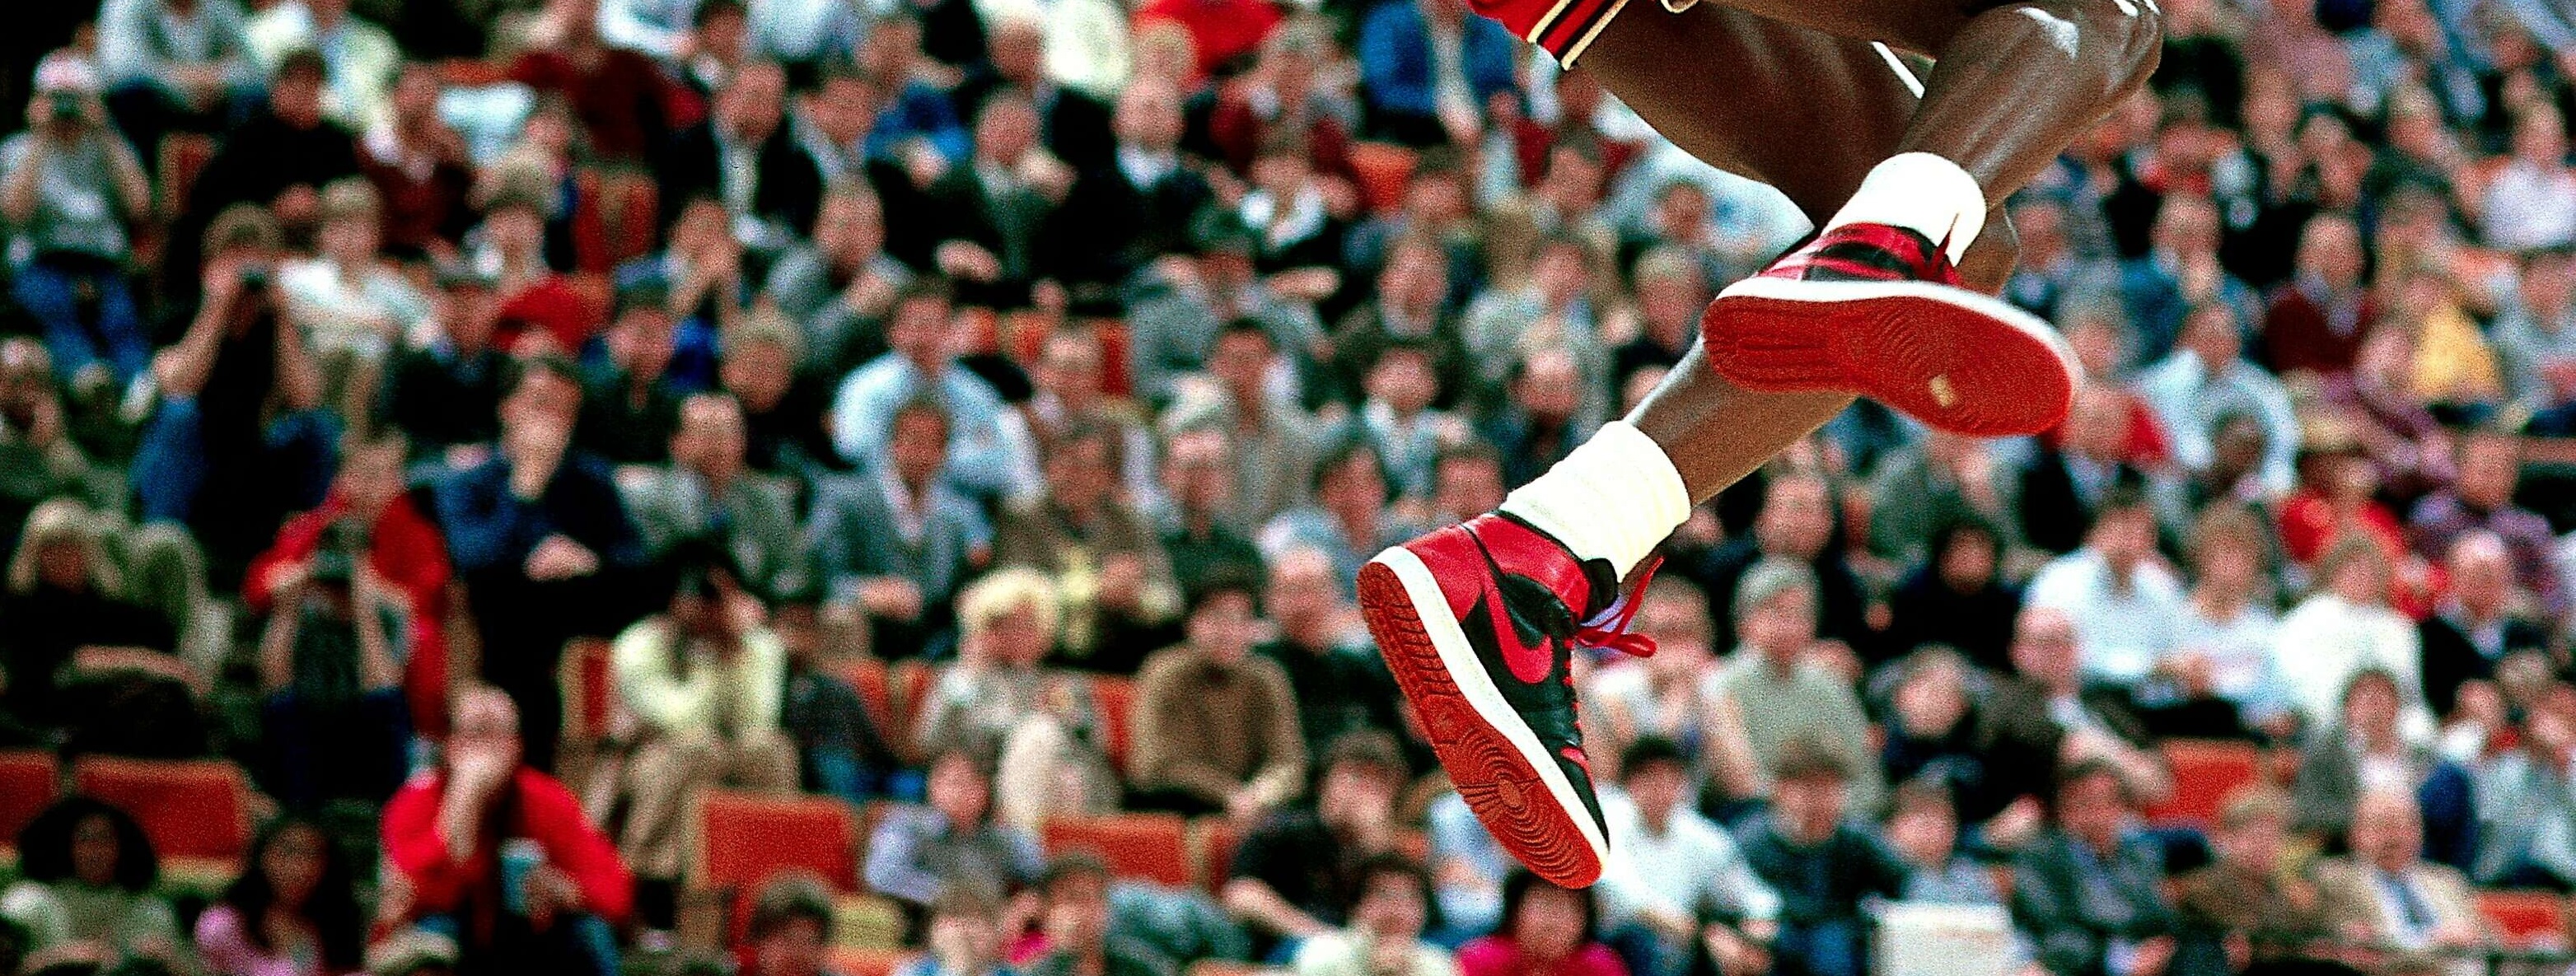 why was air jordan 1 banned from nba